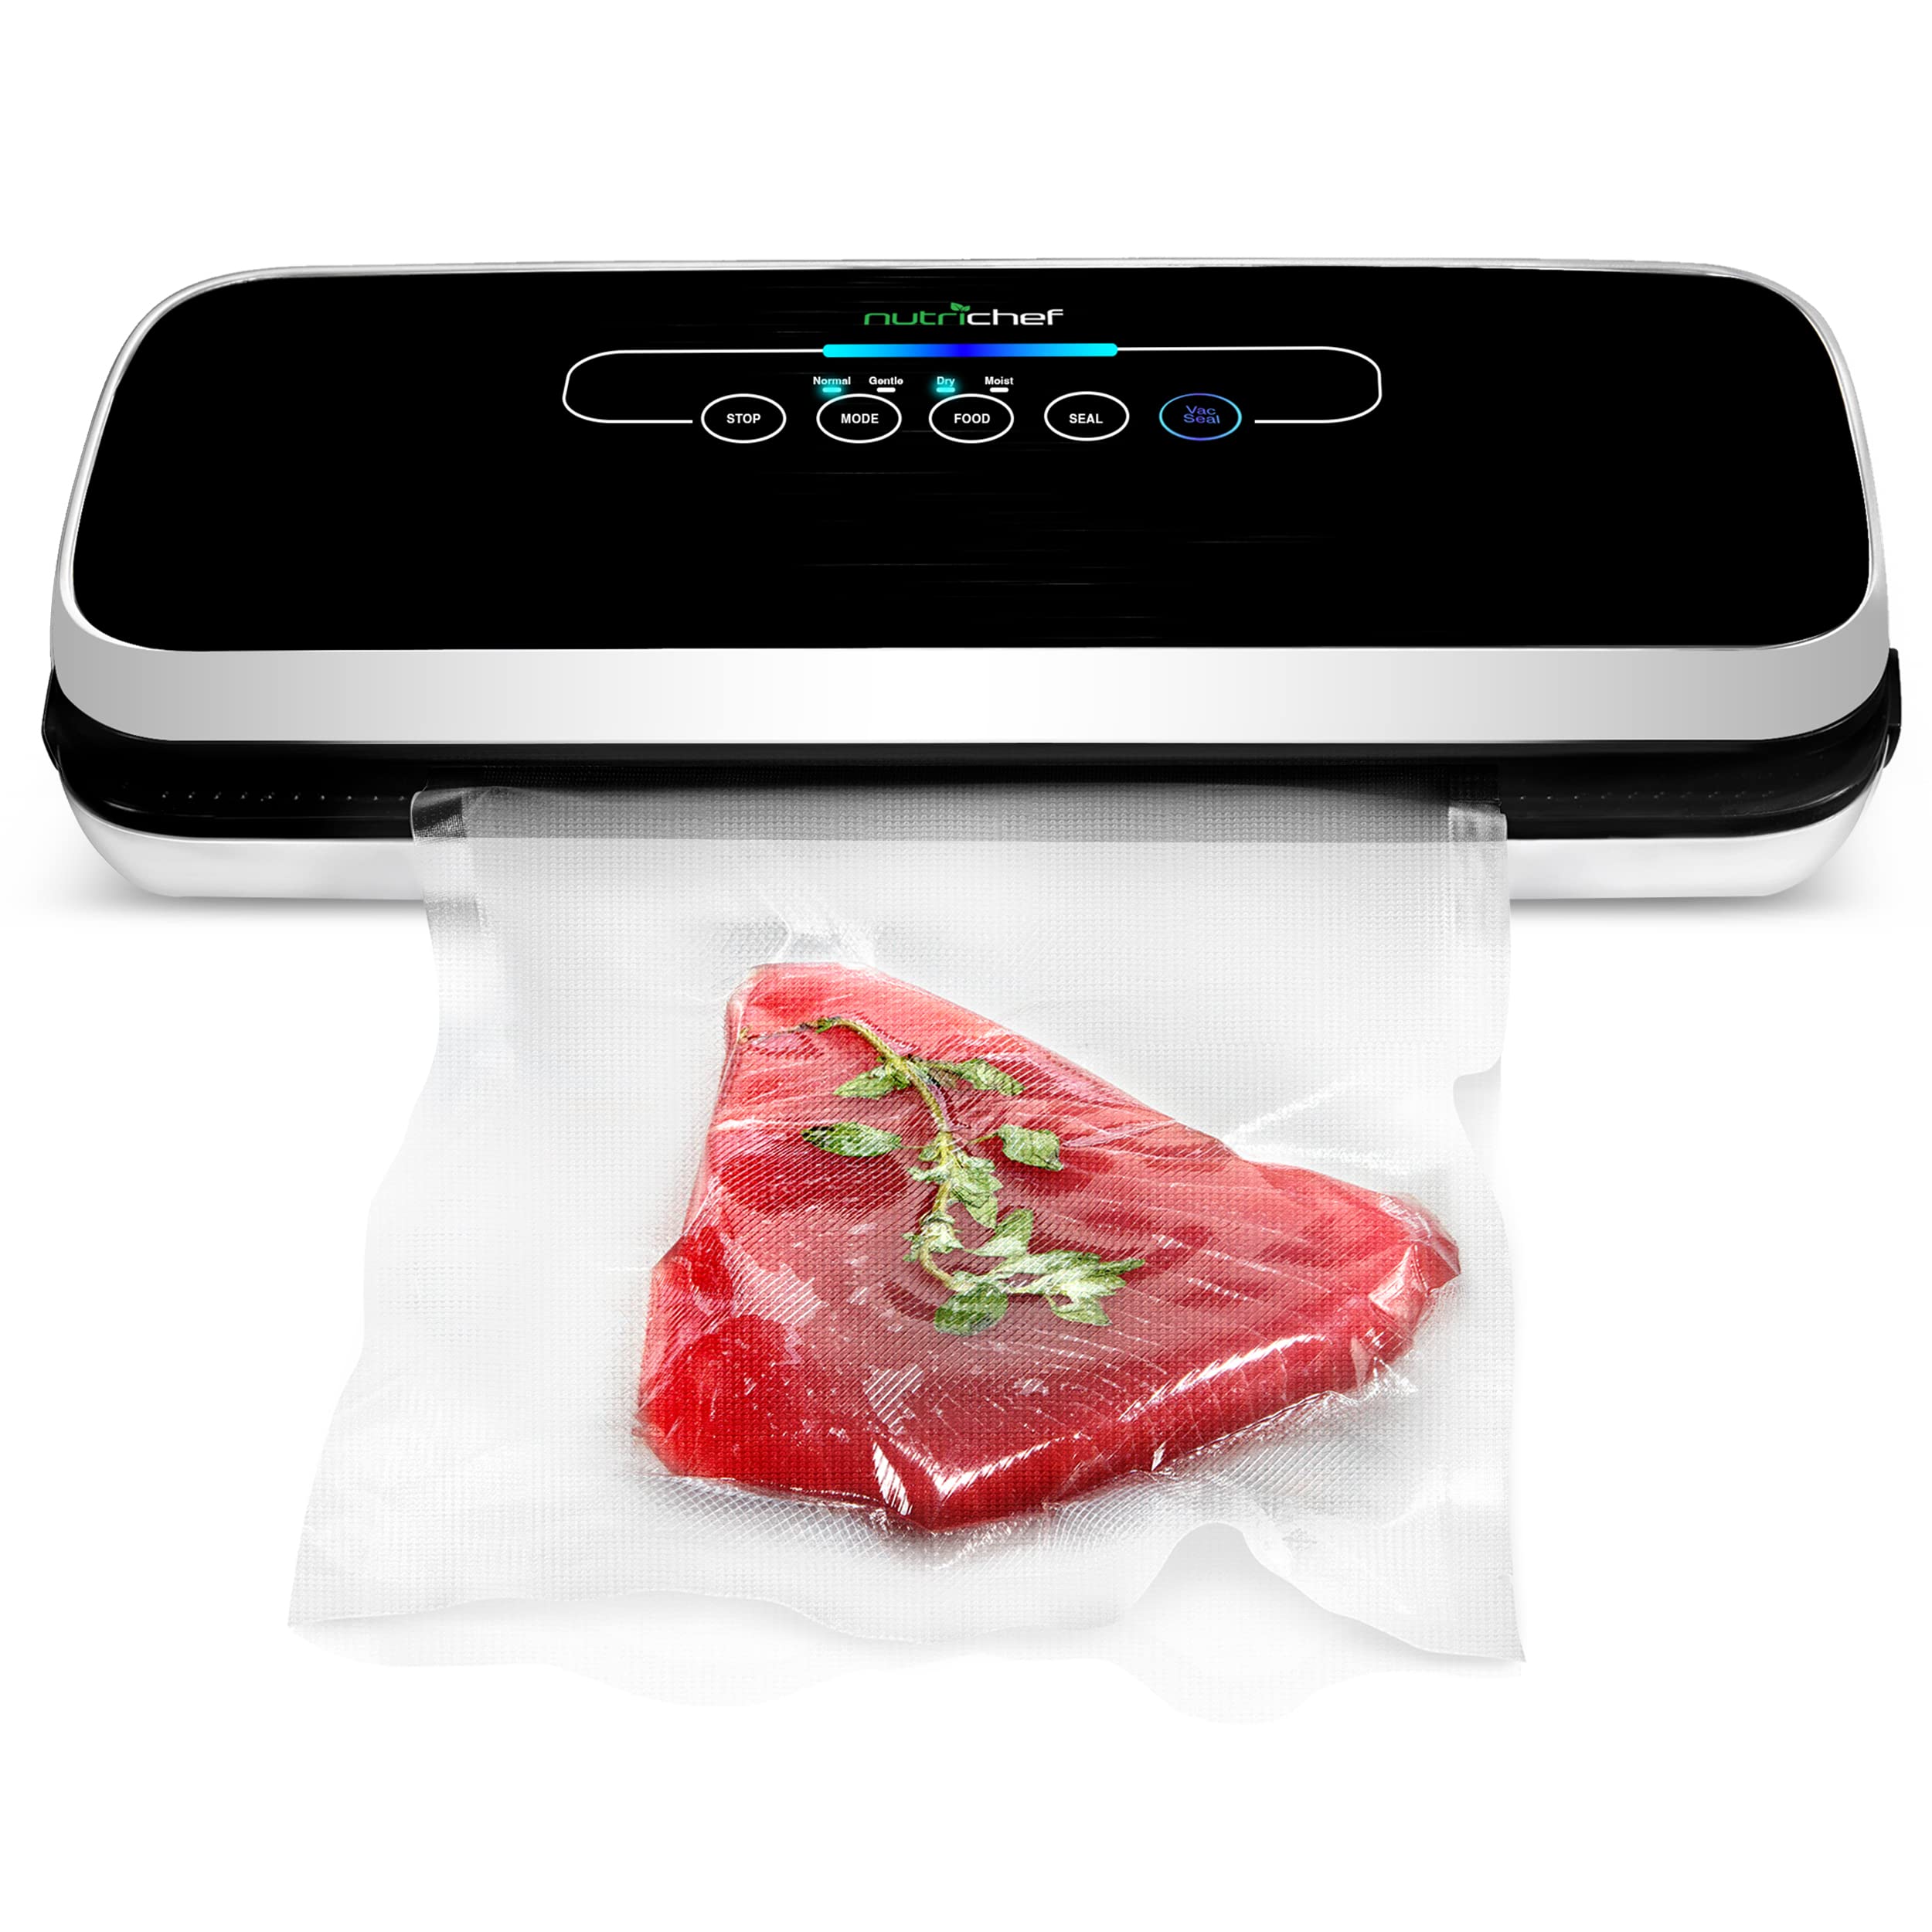 NutriChef Automatic Vacuum Air Sealing System Preservation with Starter Kit Compact Design, Lab Tested, Dry & Moist Food Modes with Led Indicator Lights, 12